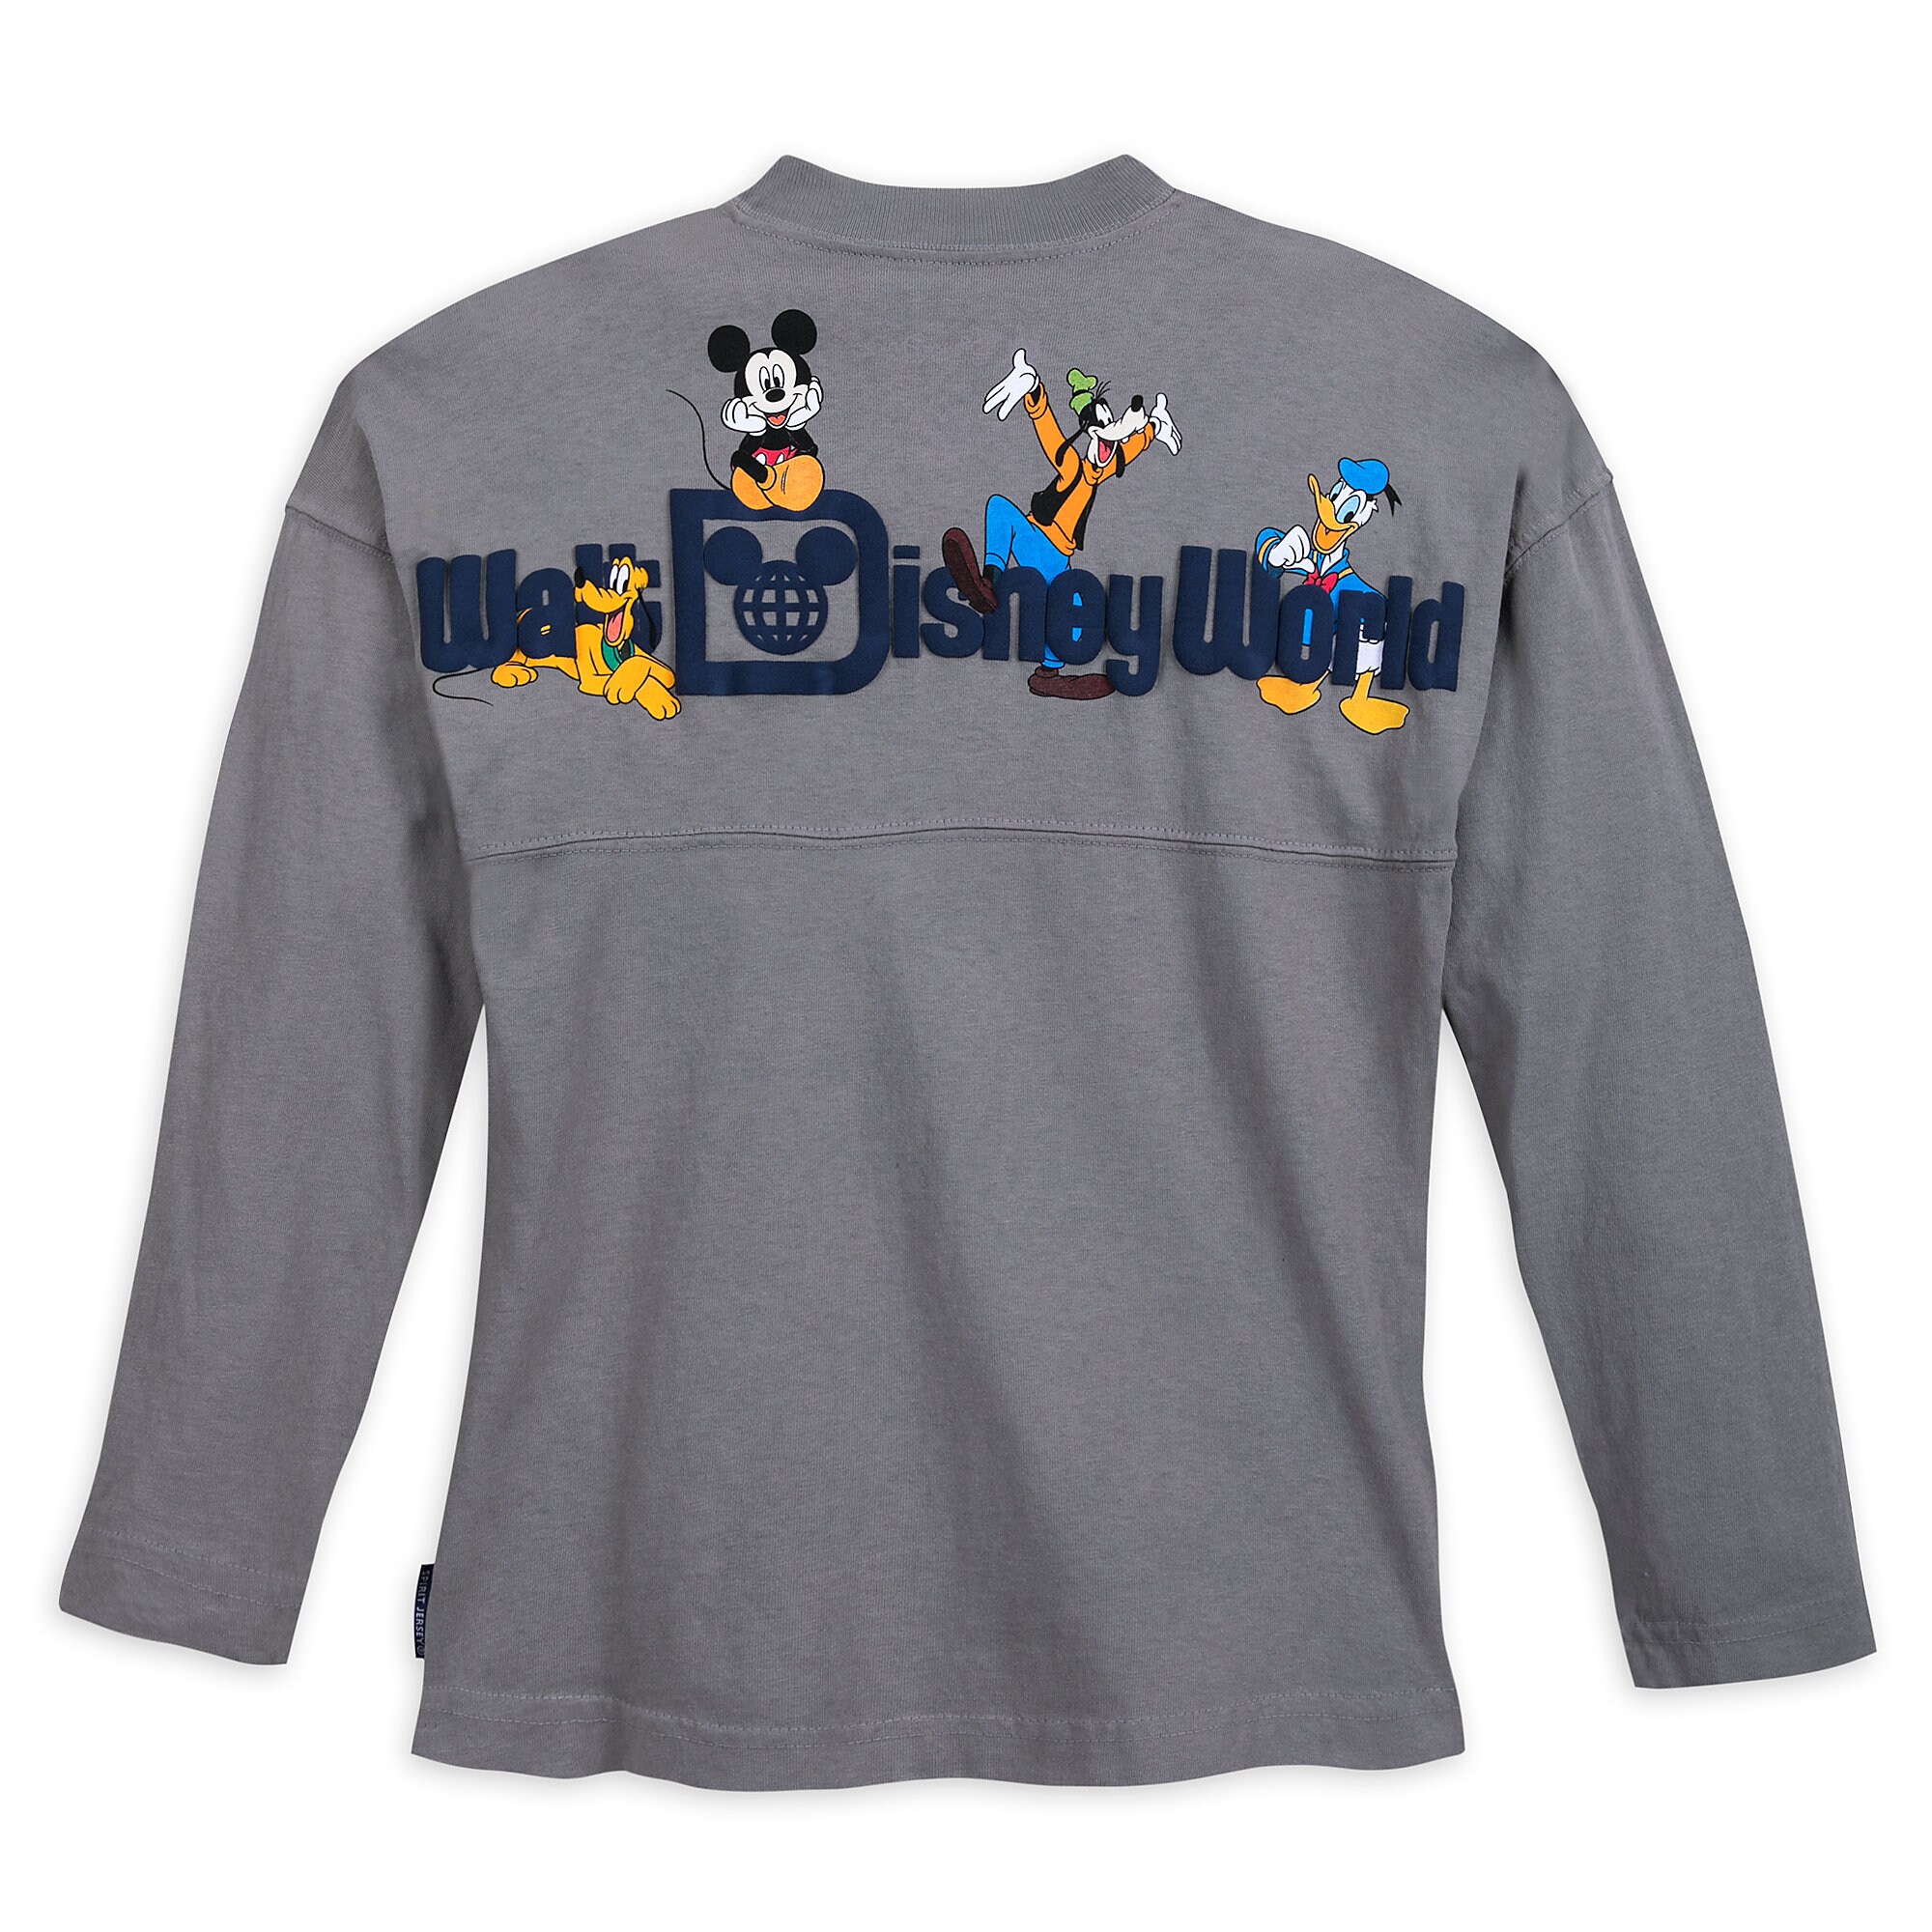 Mickey Mouse and Friends Spirit Jersey for Kids - Walt Disney World